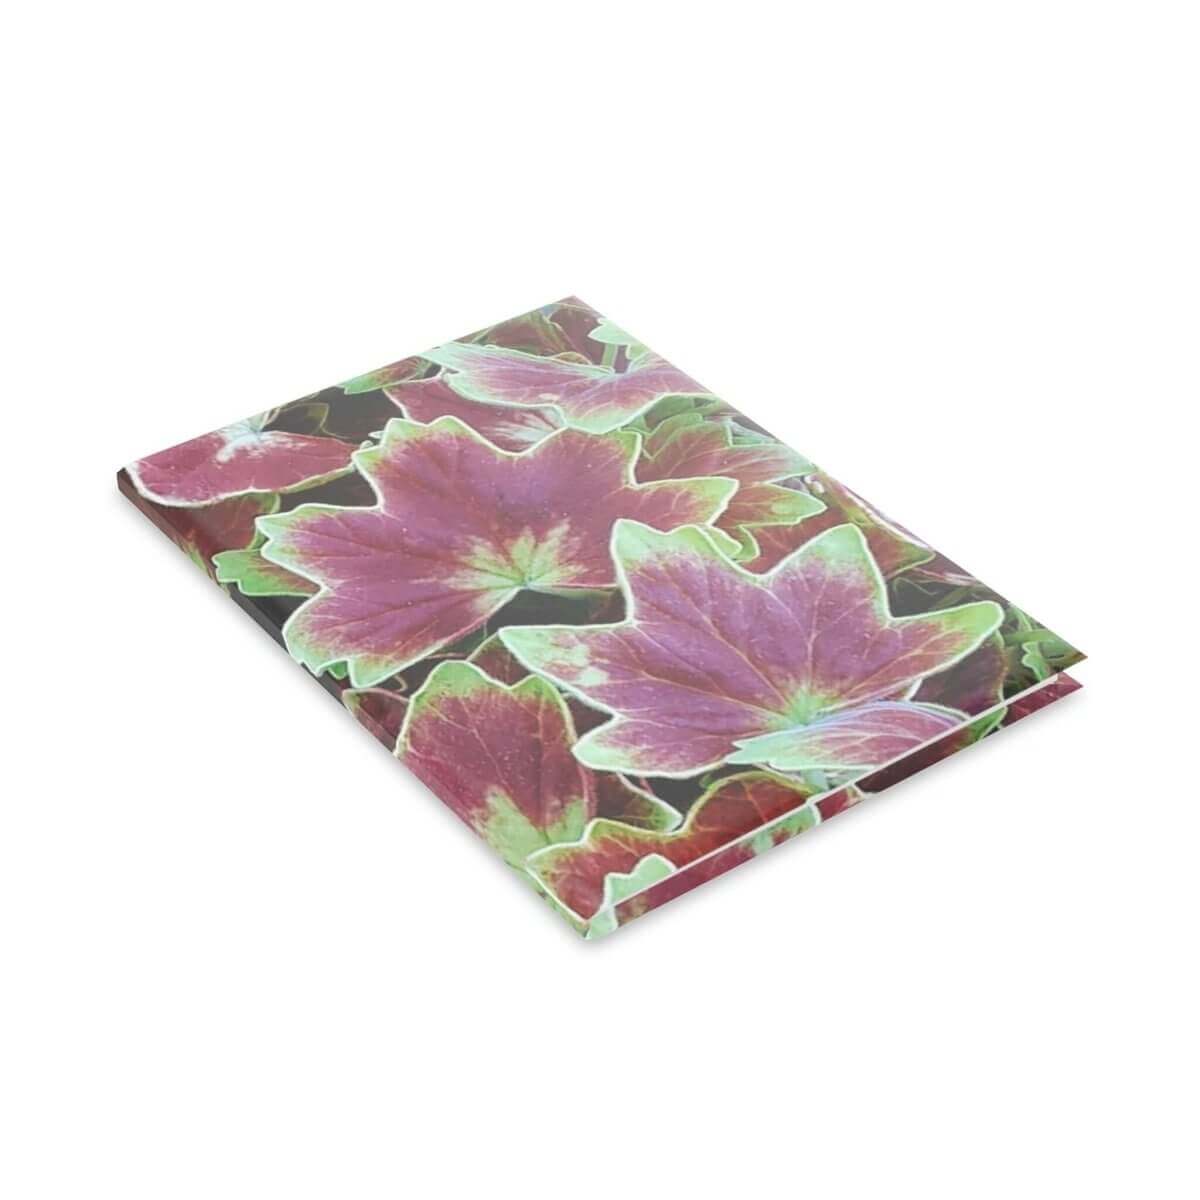 Hardcover Notebook with Puffy Covers - Geranium-2